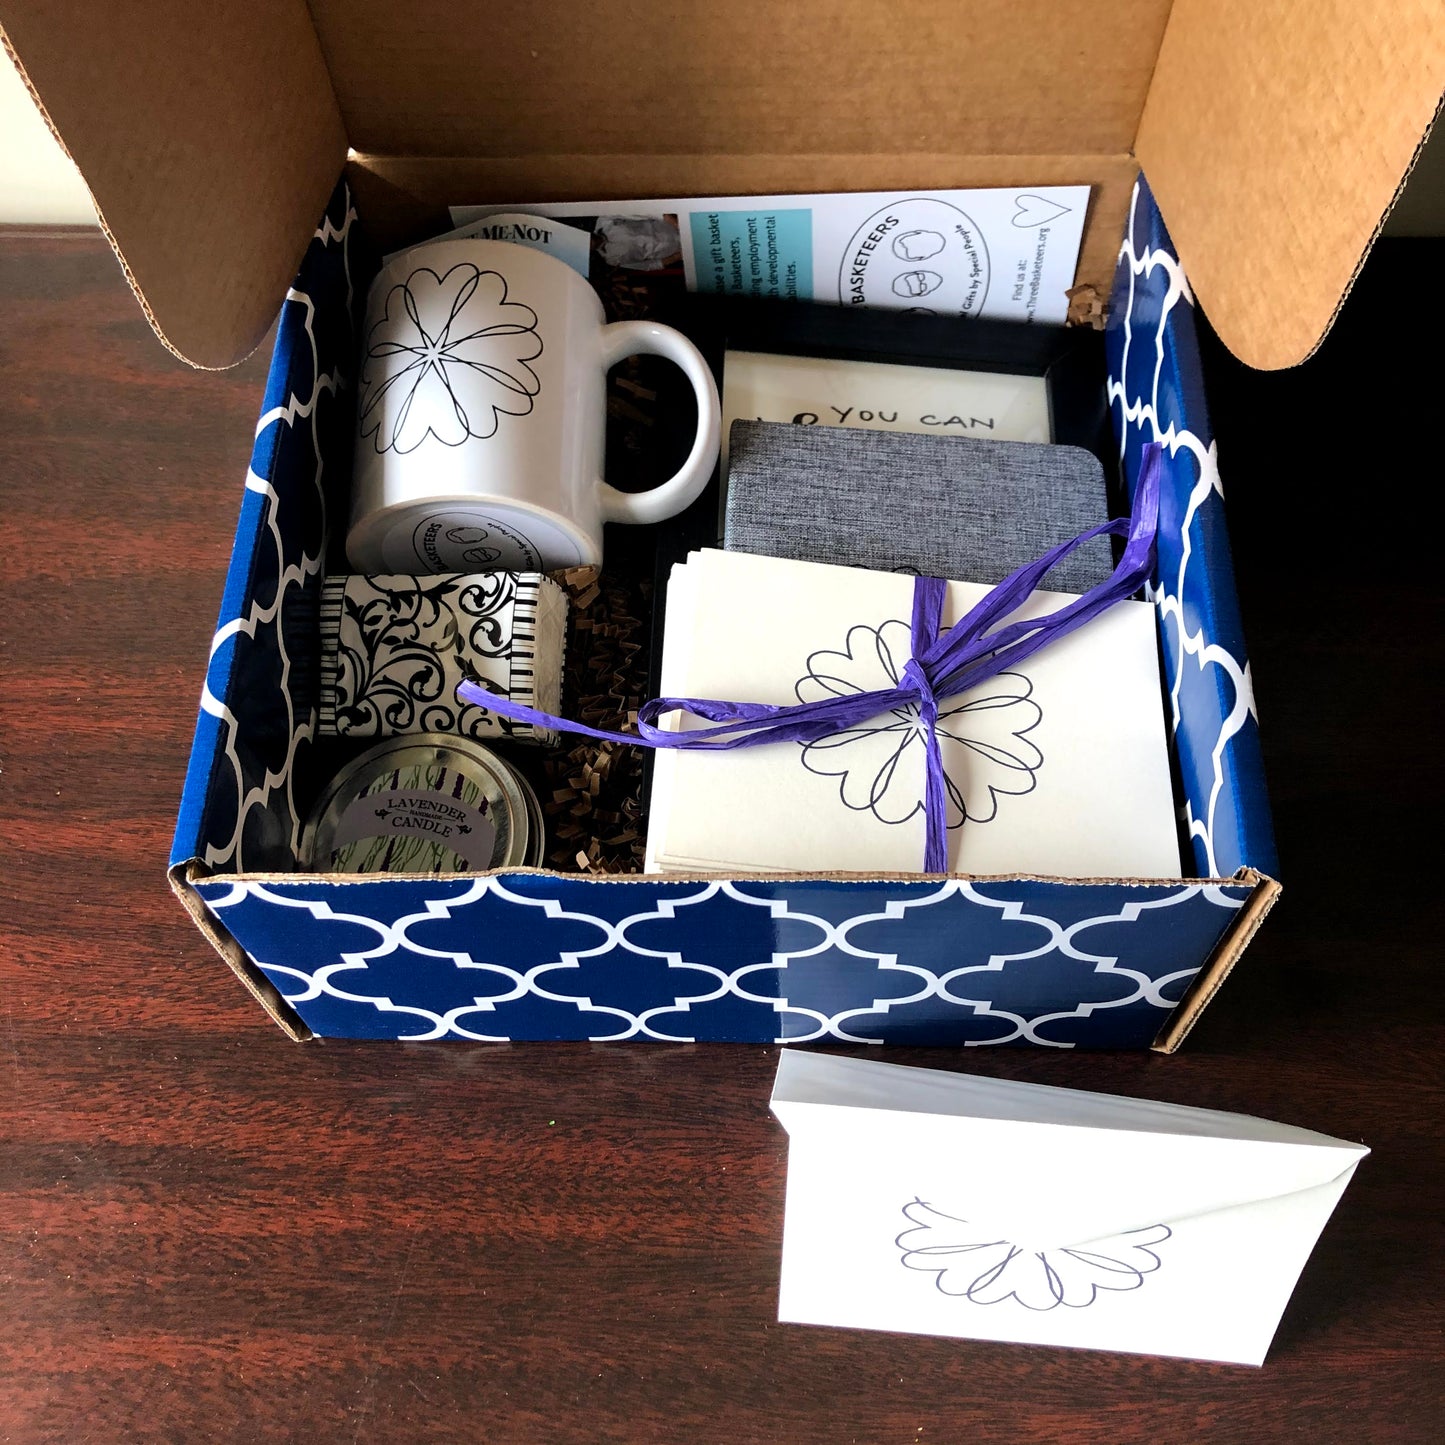 This condolence gift box includes a double wick lavender candle, handmade heart wreath notecards, gourmet coffee,  chocolate, ceramic mug, framed inspirational calligraphy, fabric covered journal, tissues and a forget me-not-seed packet in a patterned box ideal for shipping nationally